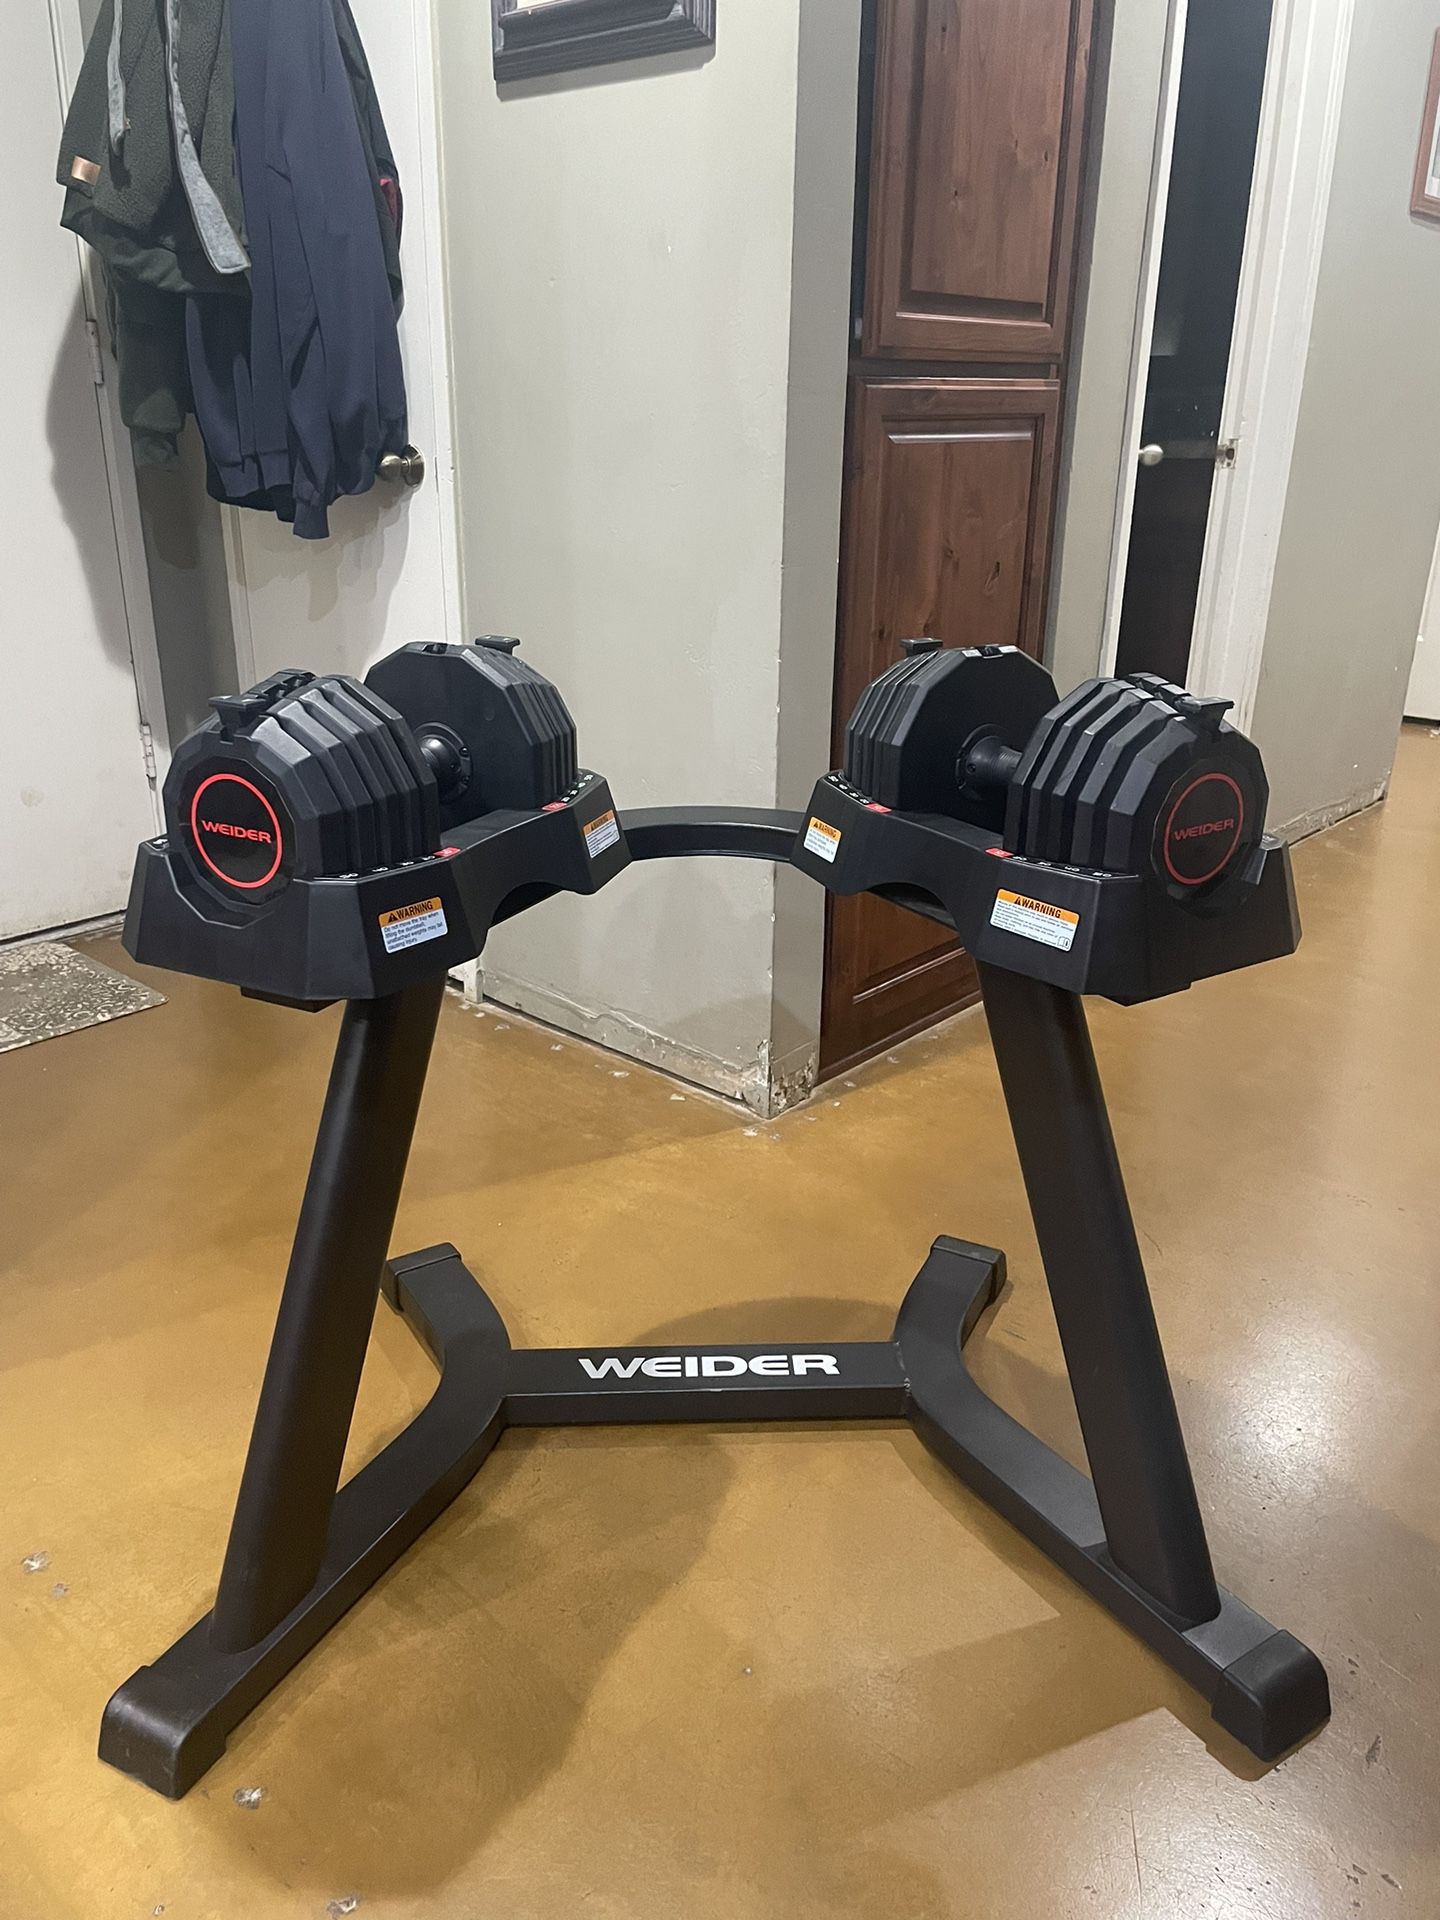 Weider Adjustable Dumbbells And Stand (delivery Available)